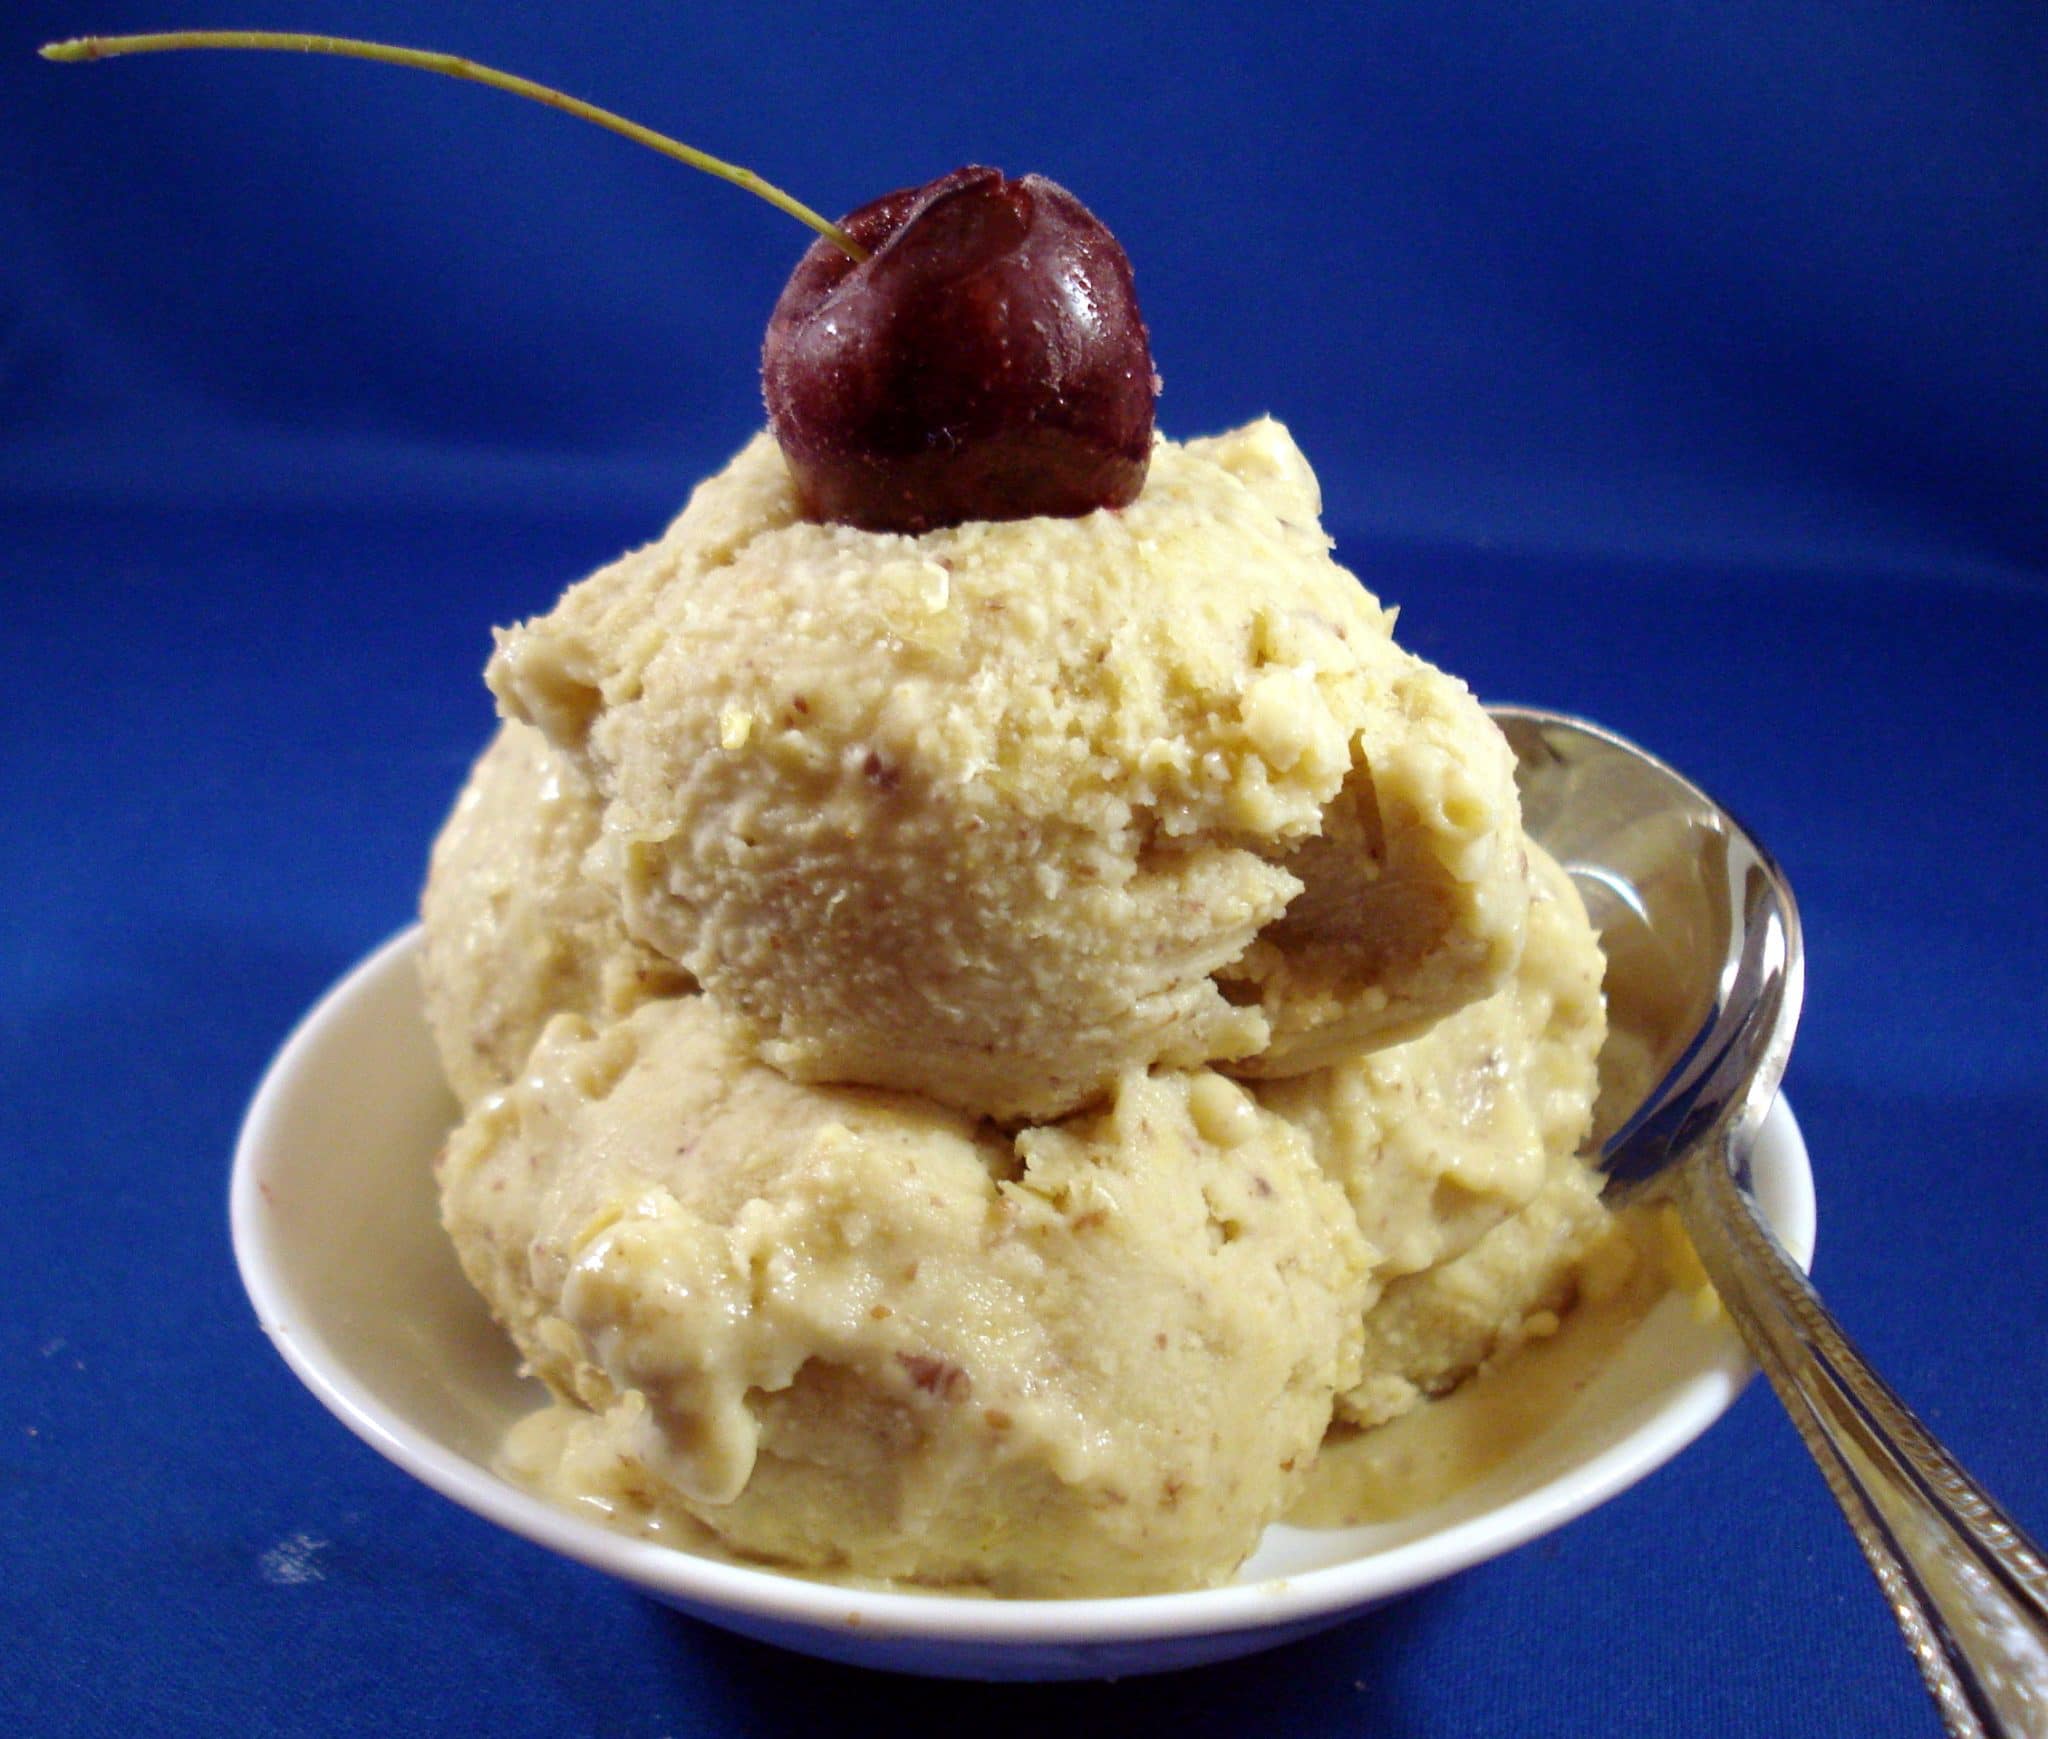 bowl of ice cream with cherry on top and spoon